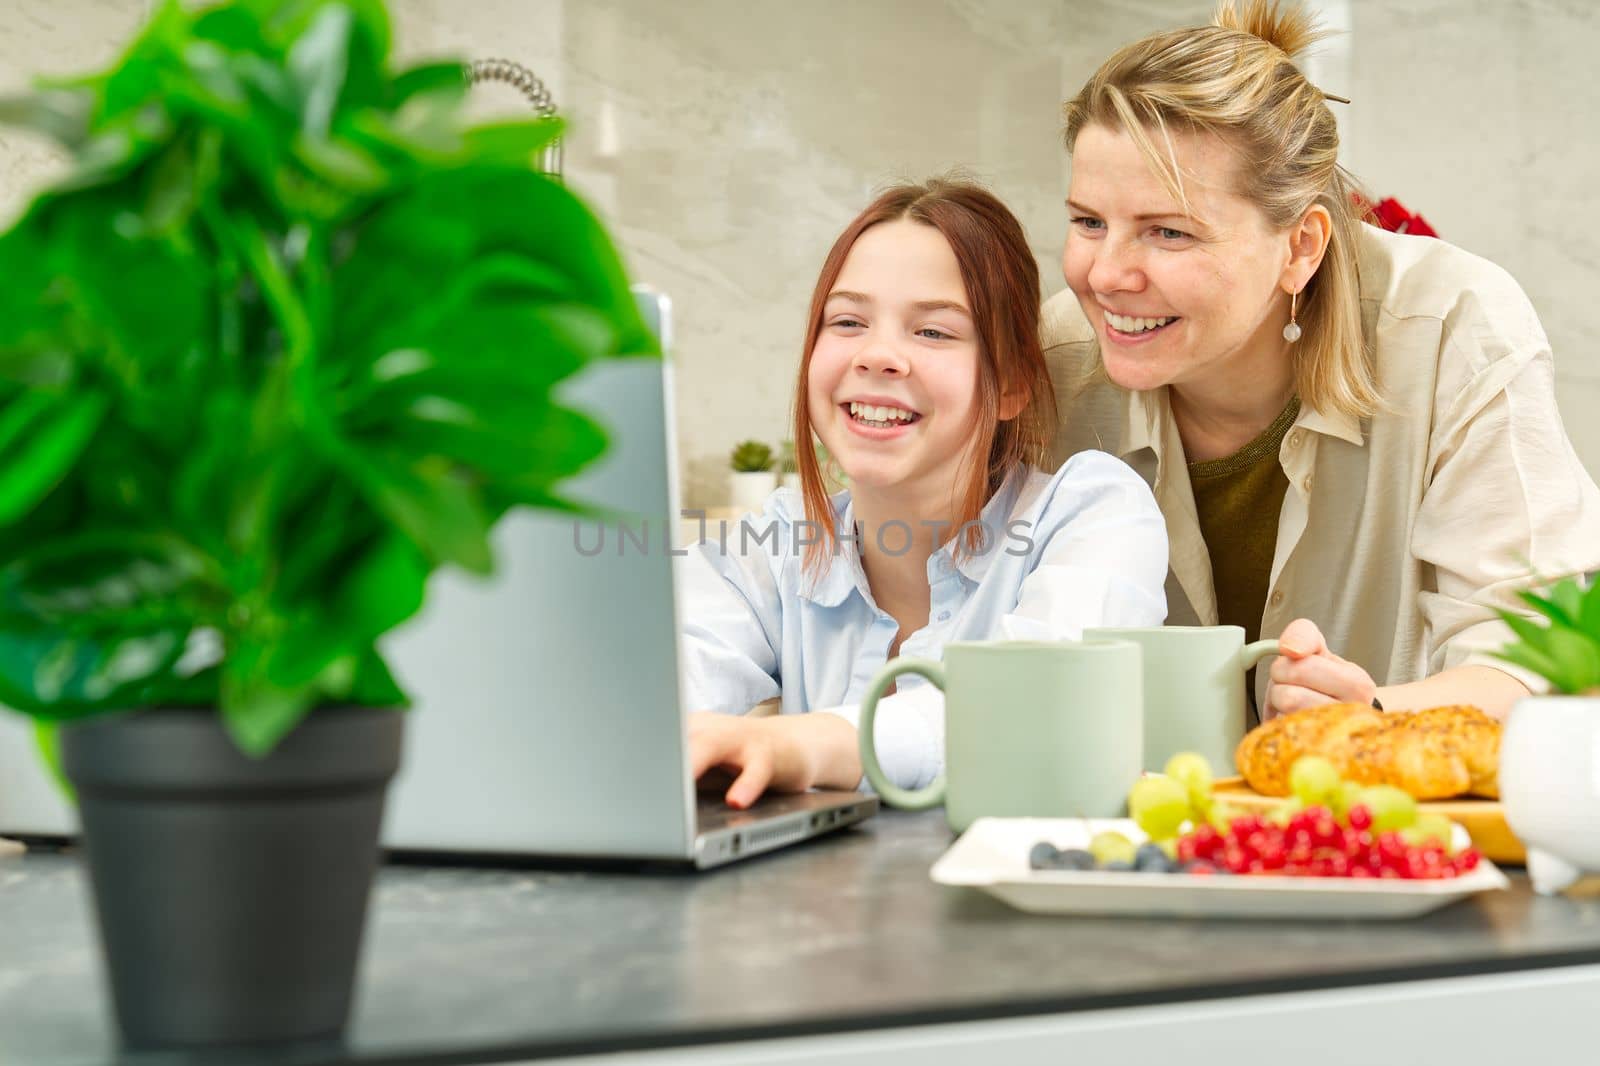 Happy mother and daughter having breakfast in kitchen and using digital devices. Lifestyle by PhotoTime